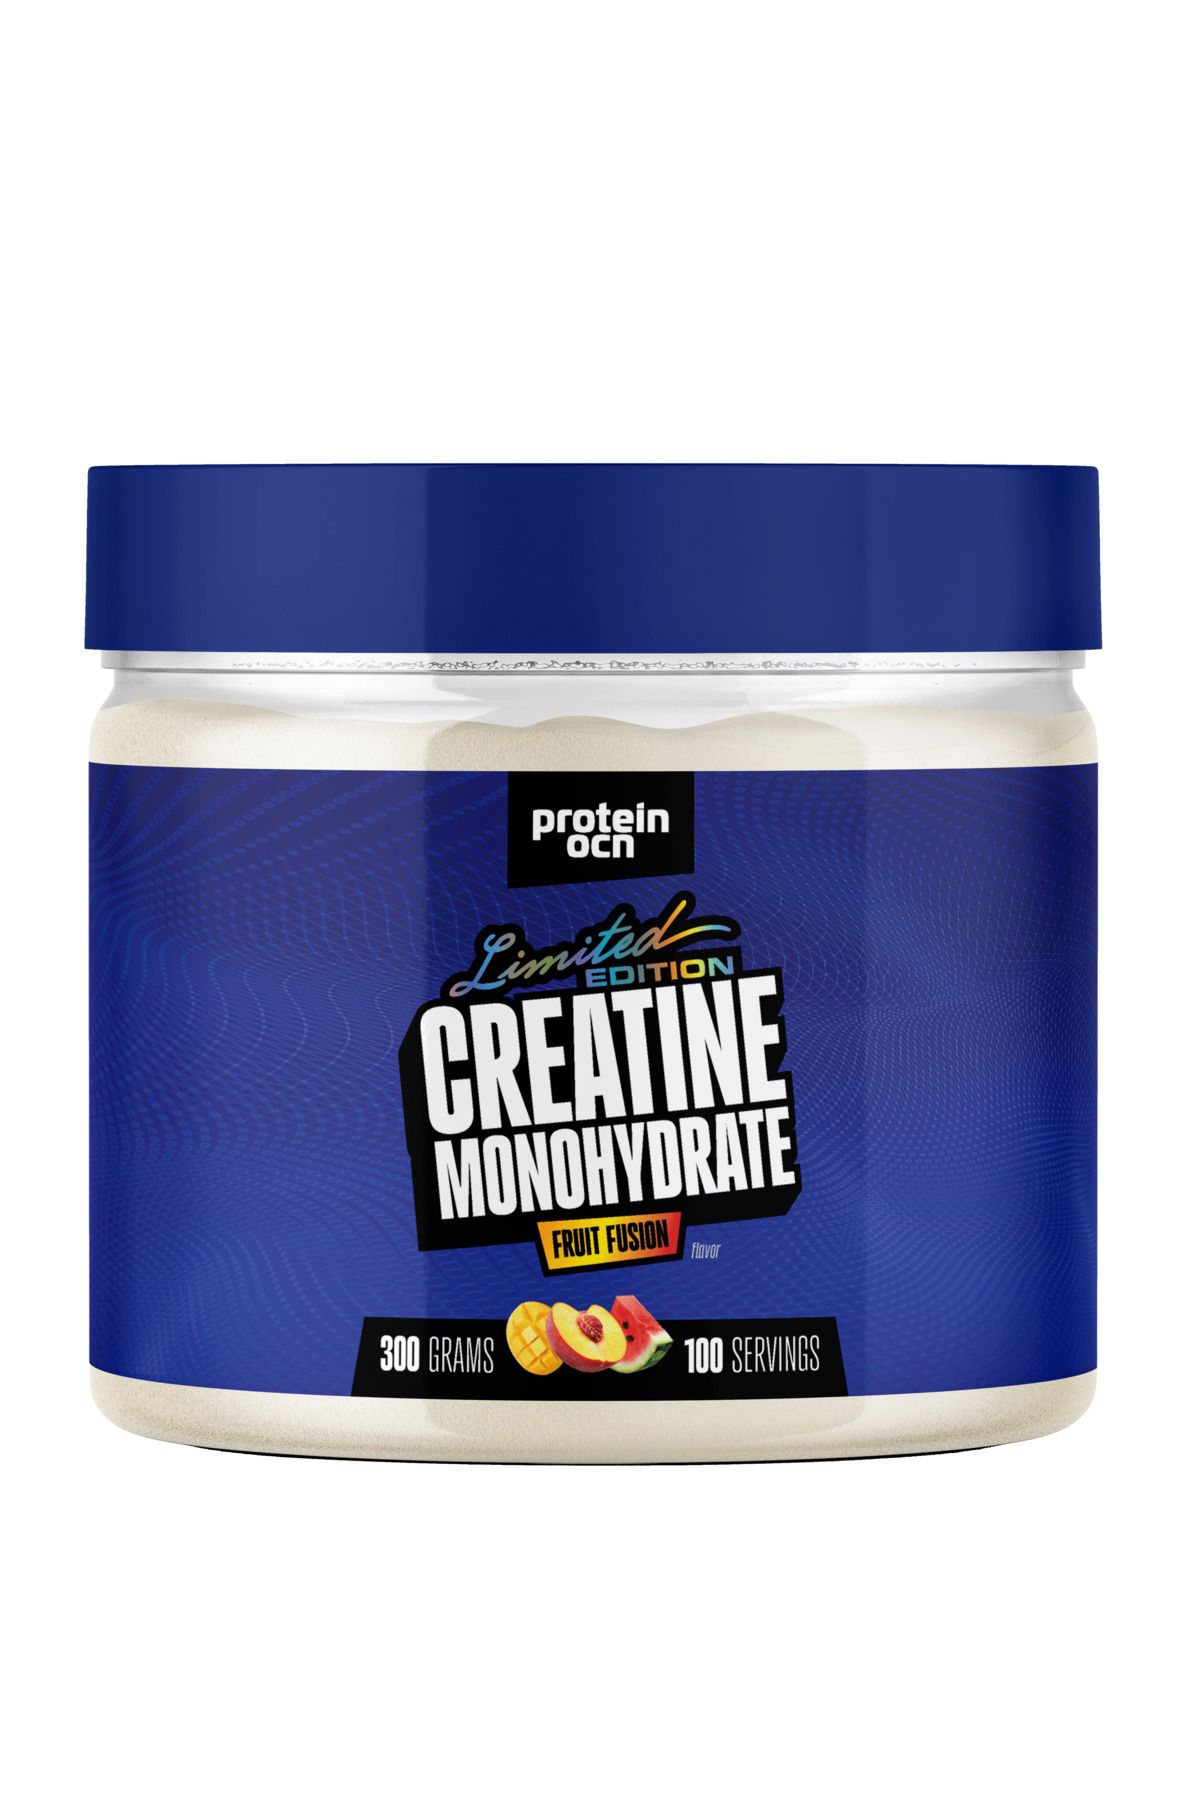 Proteinocean CREATİNE - Limited Edition - Fruit Fusion - 300g - 100 servis